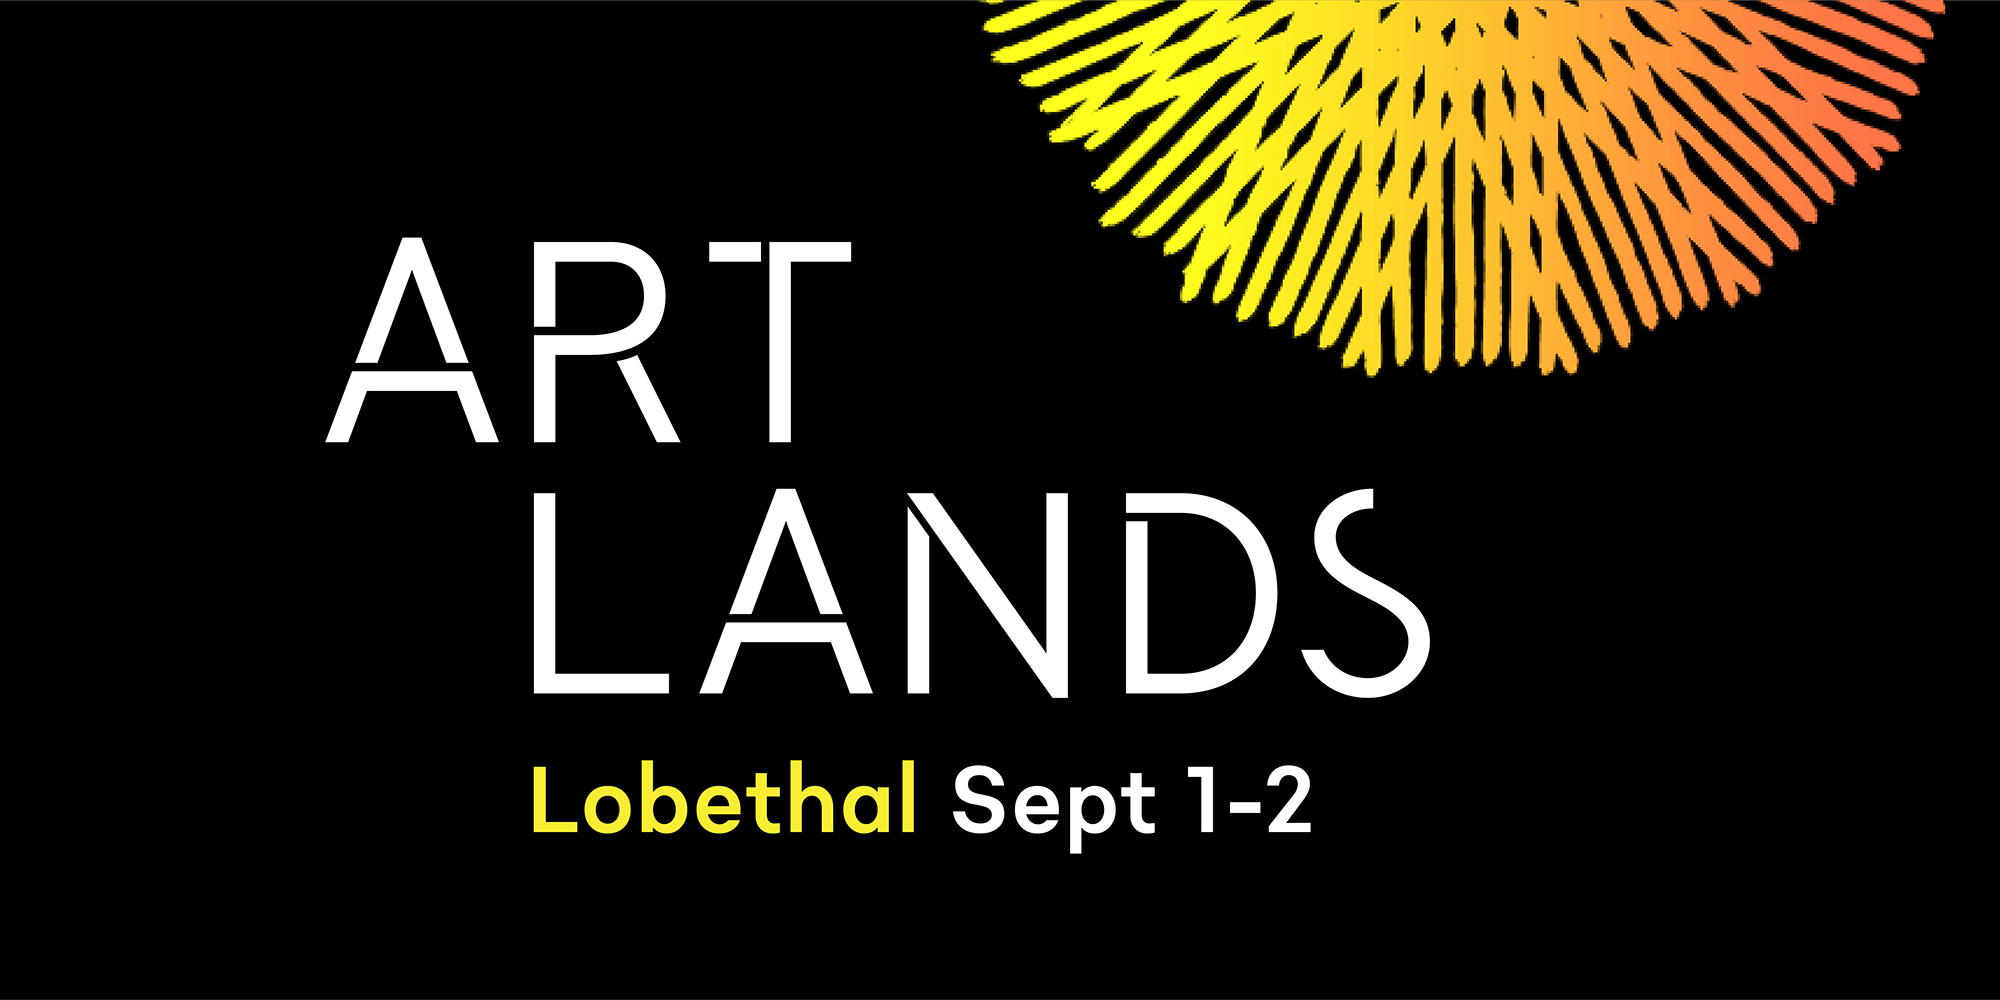 Image has a black background with ART LANDS - Lobethal Sept 1 - 2 written across it On the top right is a yellow and orange sun pattern.